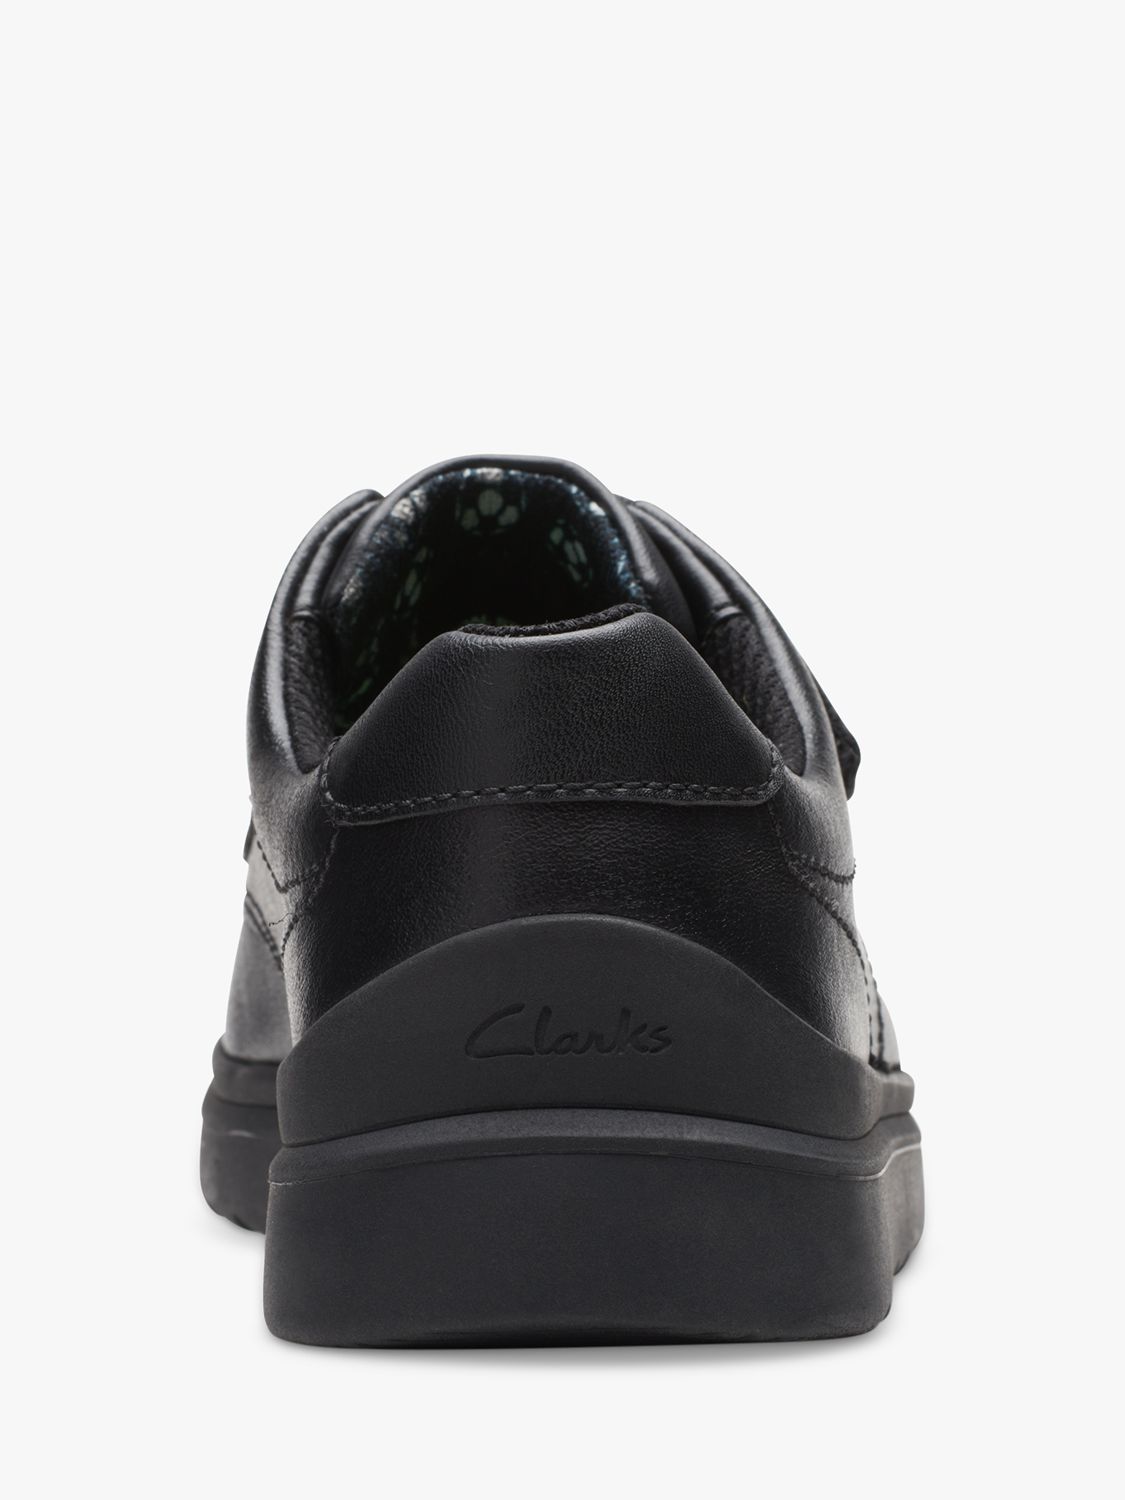 Buy Clarks Kids' Goal Style School Shoes Online at johnlewis.com